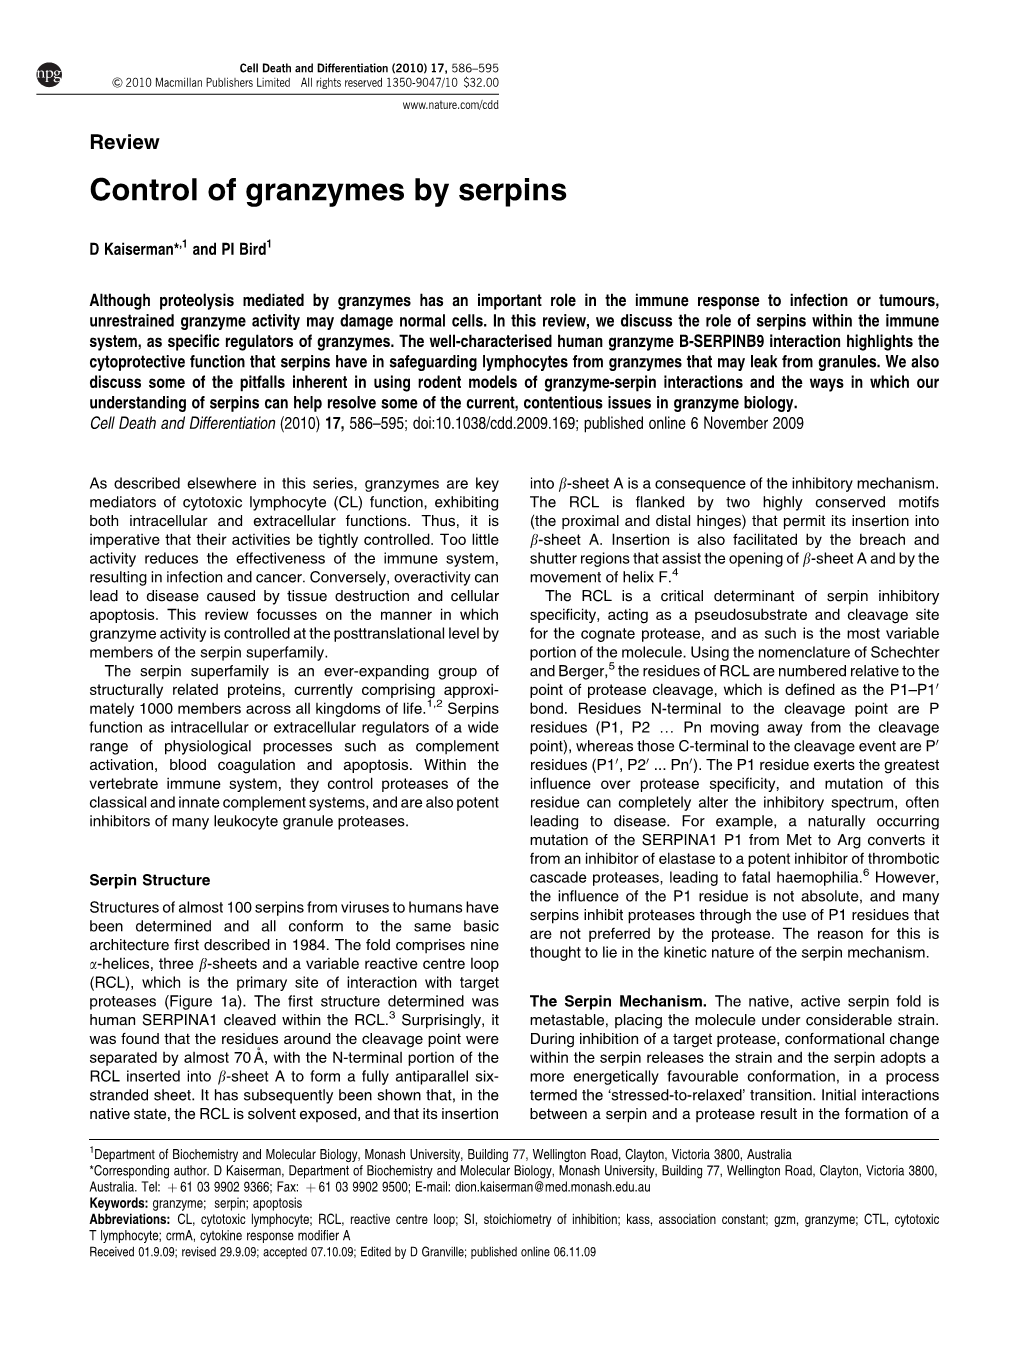 Control of Granzymes by Serpins